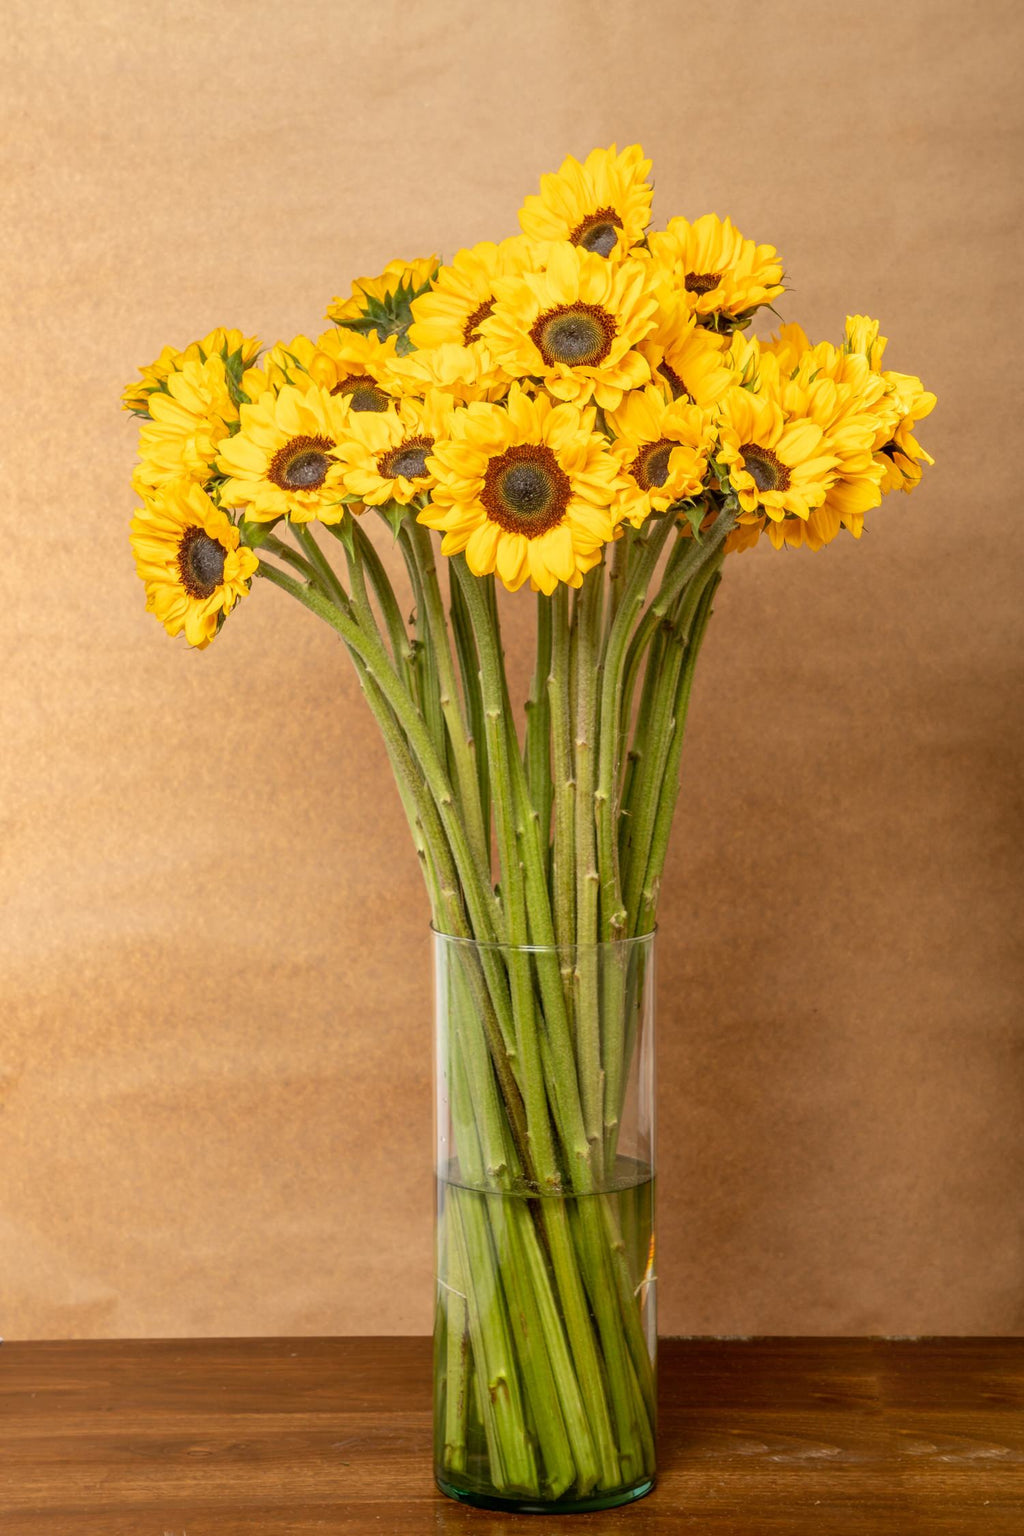 Buy Online High quality and Fresh Sunflowers - Greenchoice Flowers